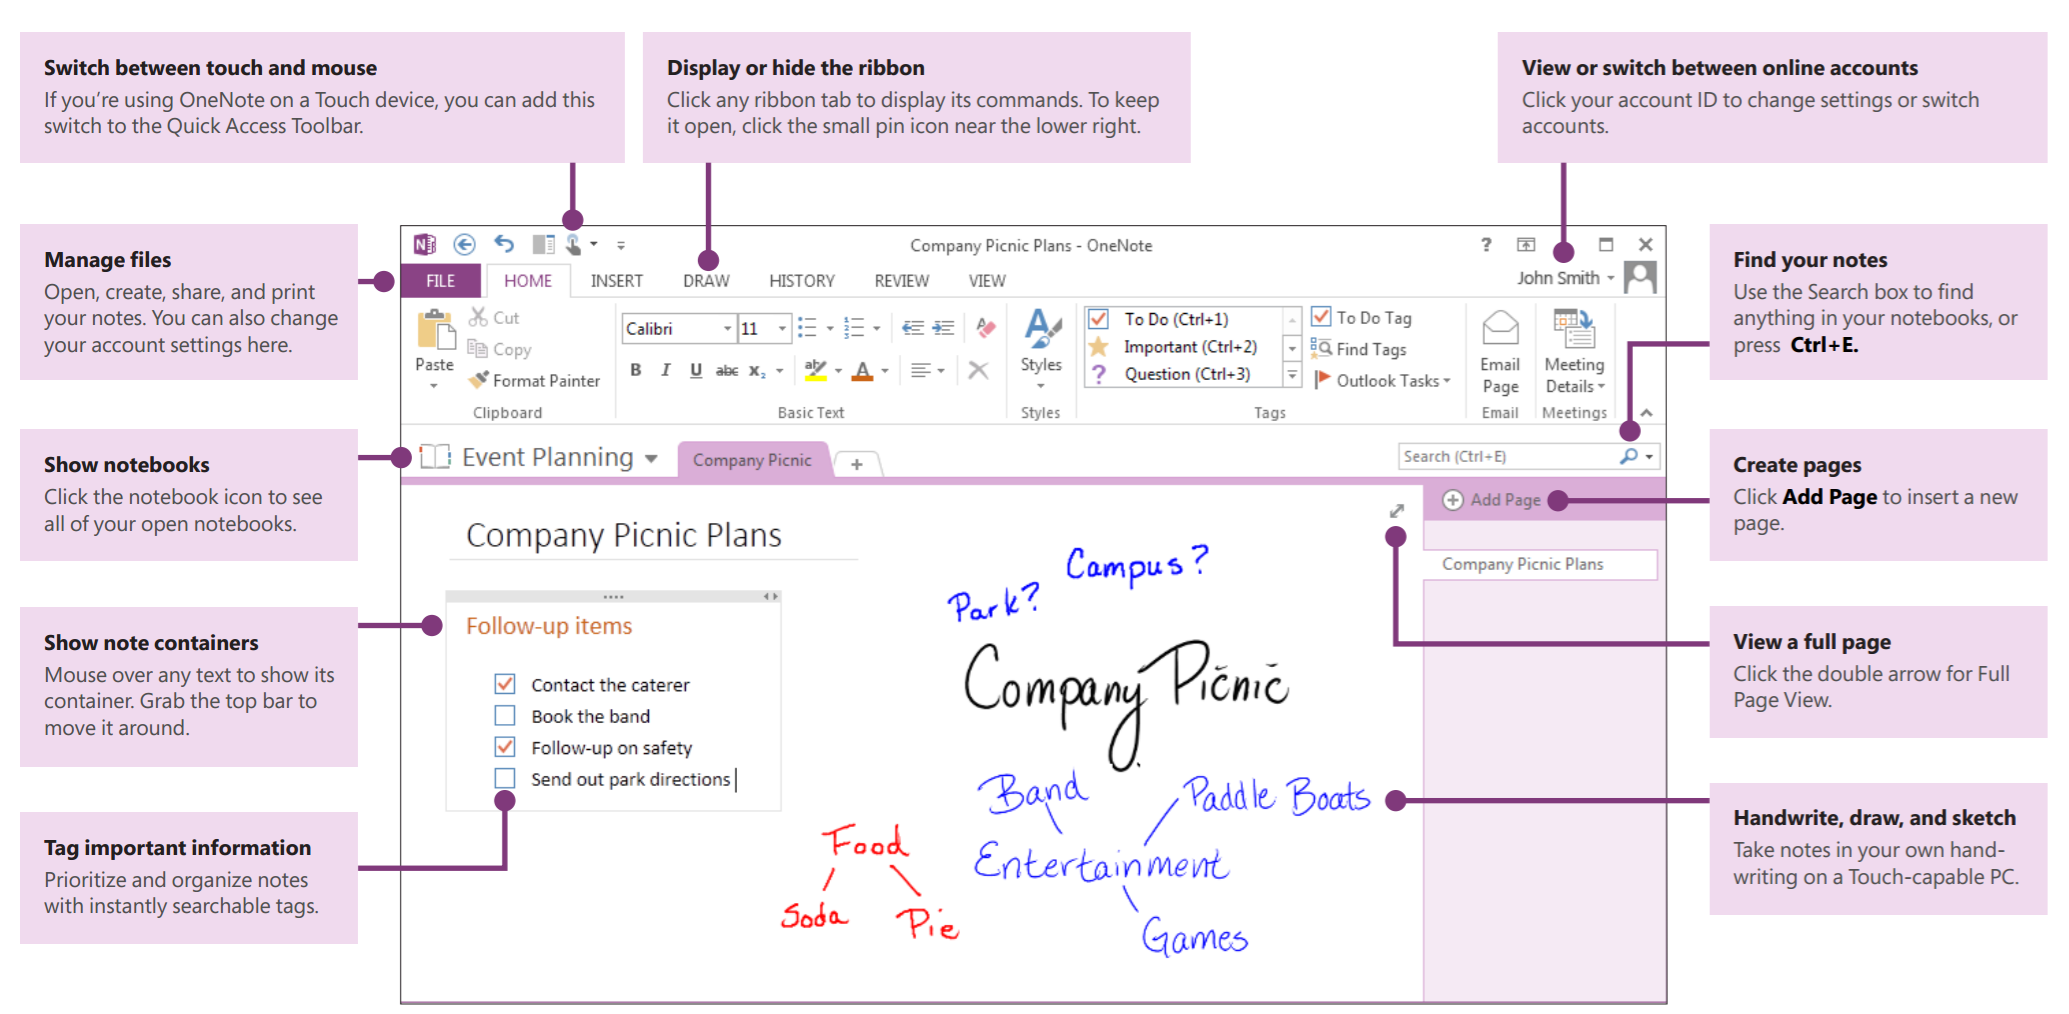 deleted notes on onenote